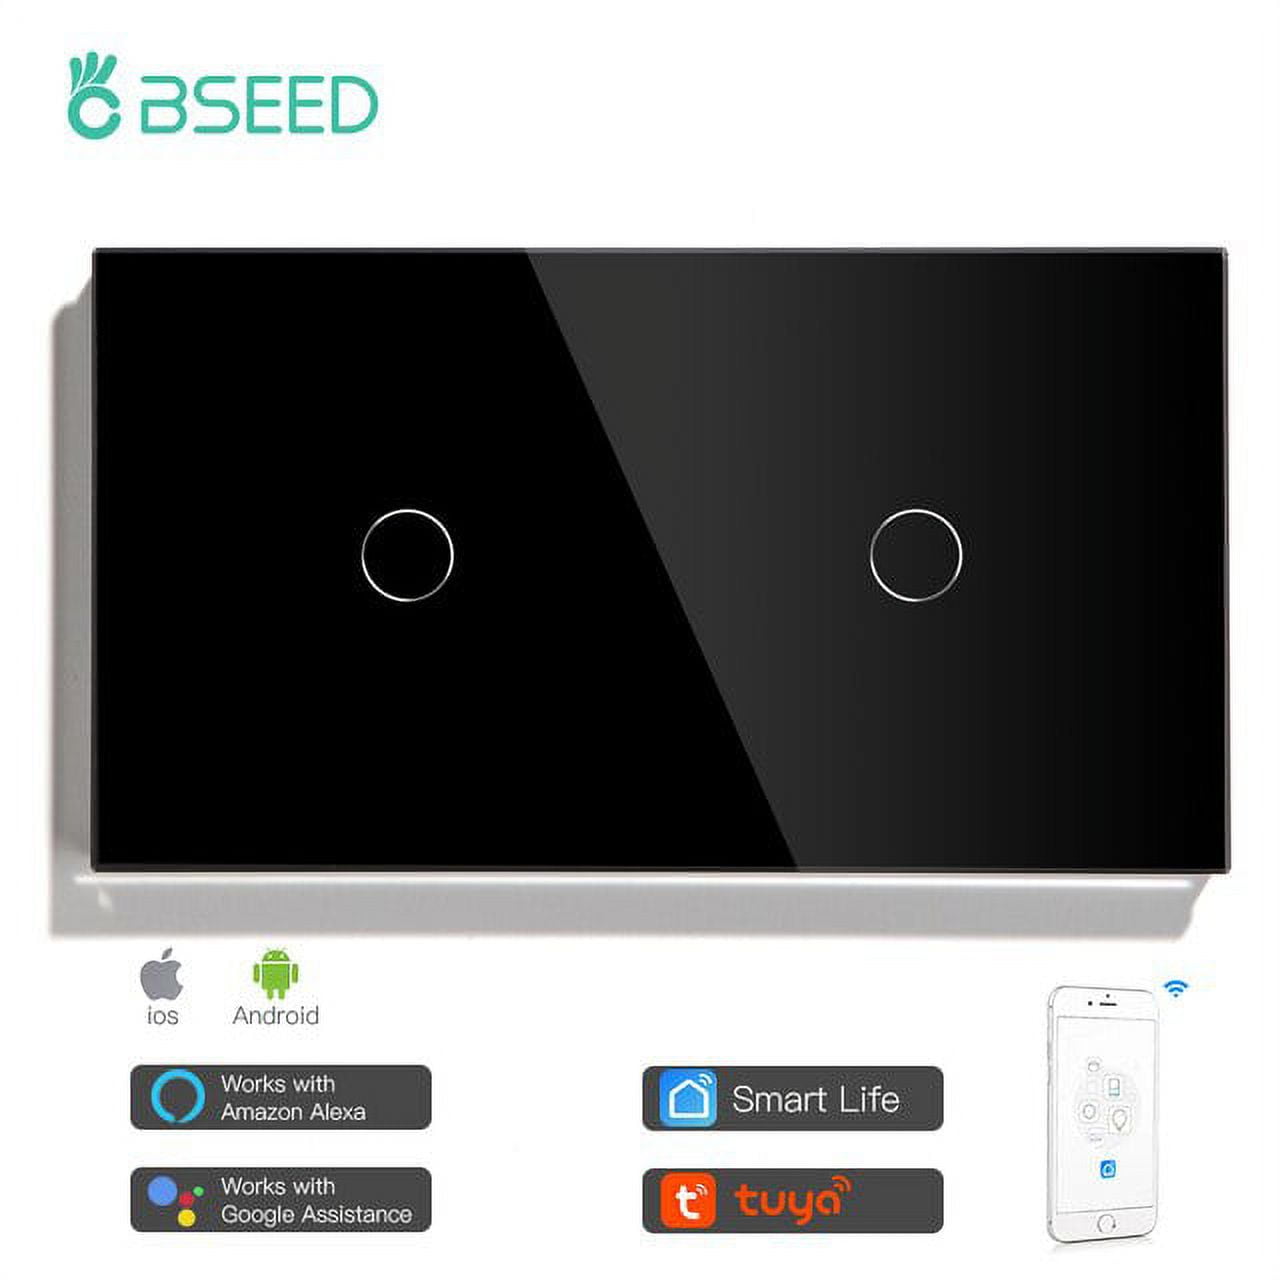 BSEED WIFI Double Light Switches Smart Touch Sensor Wall Switches